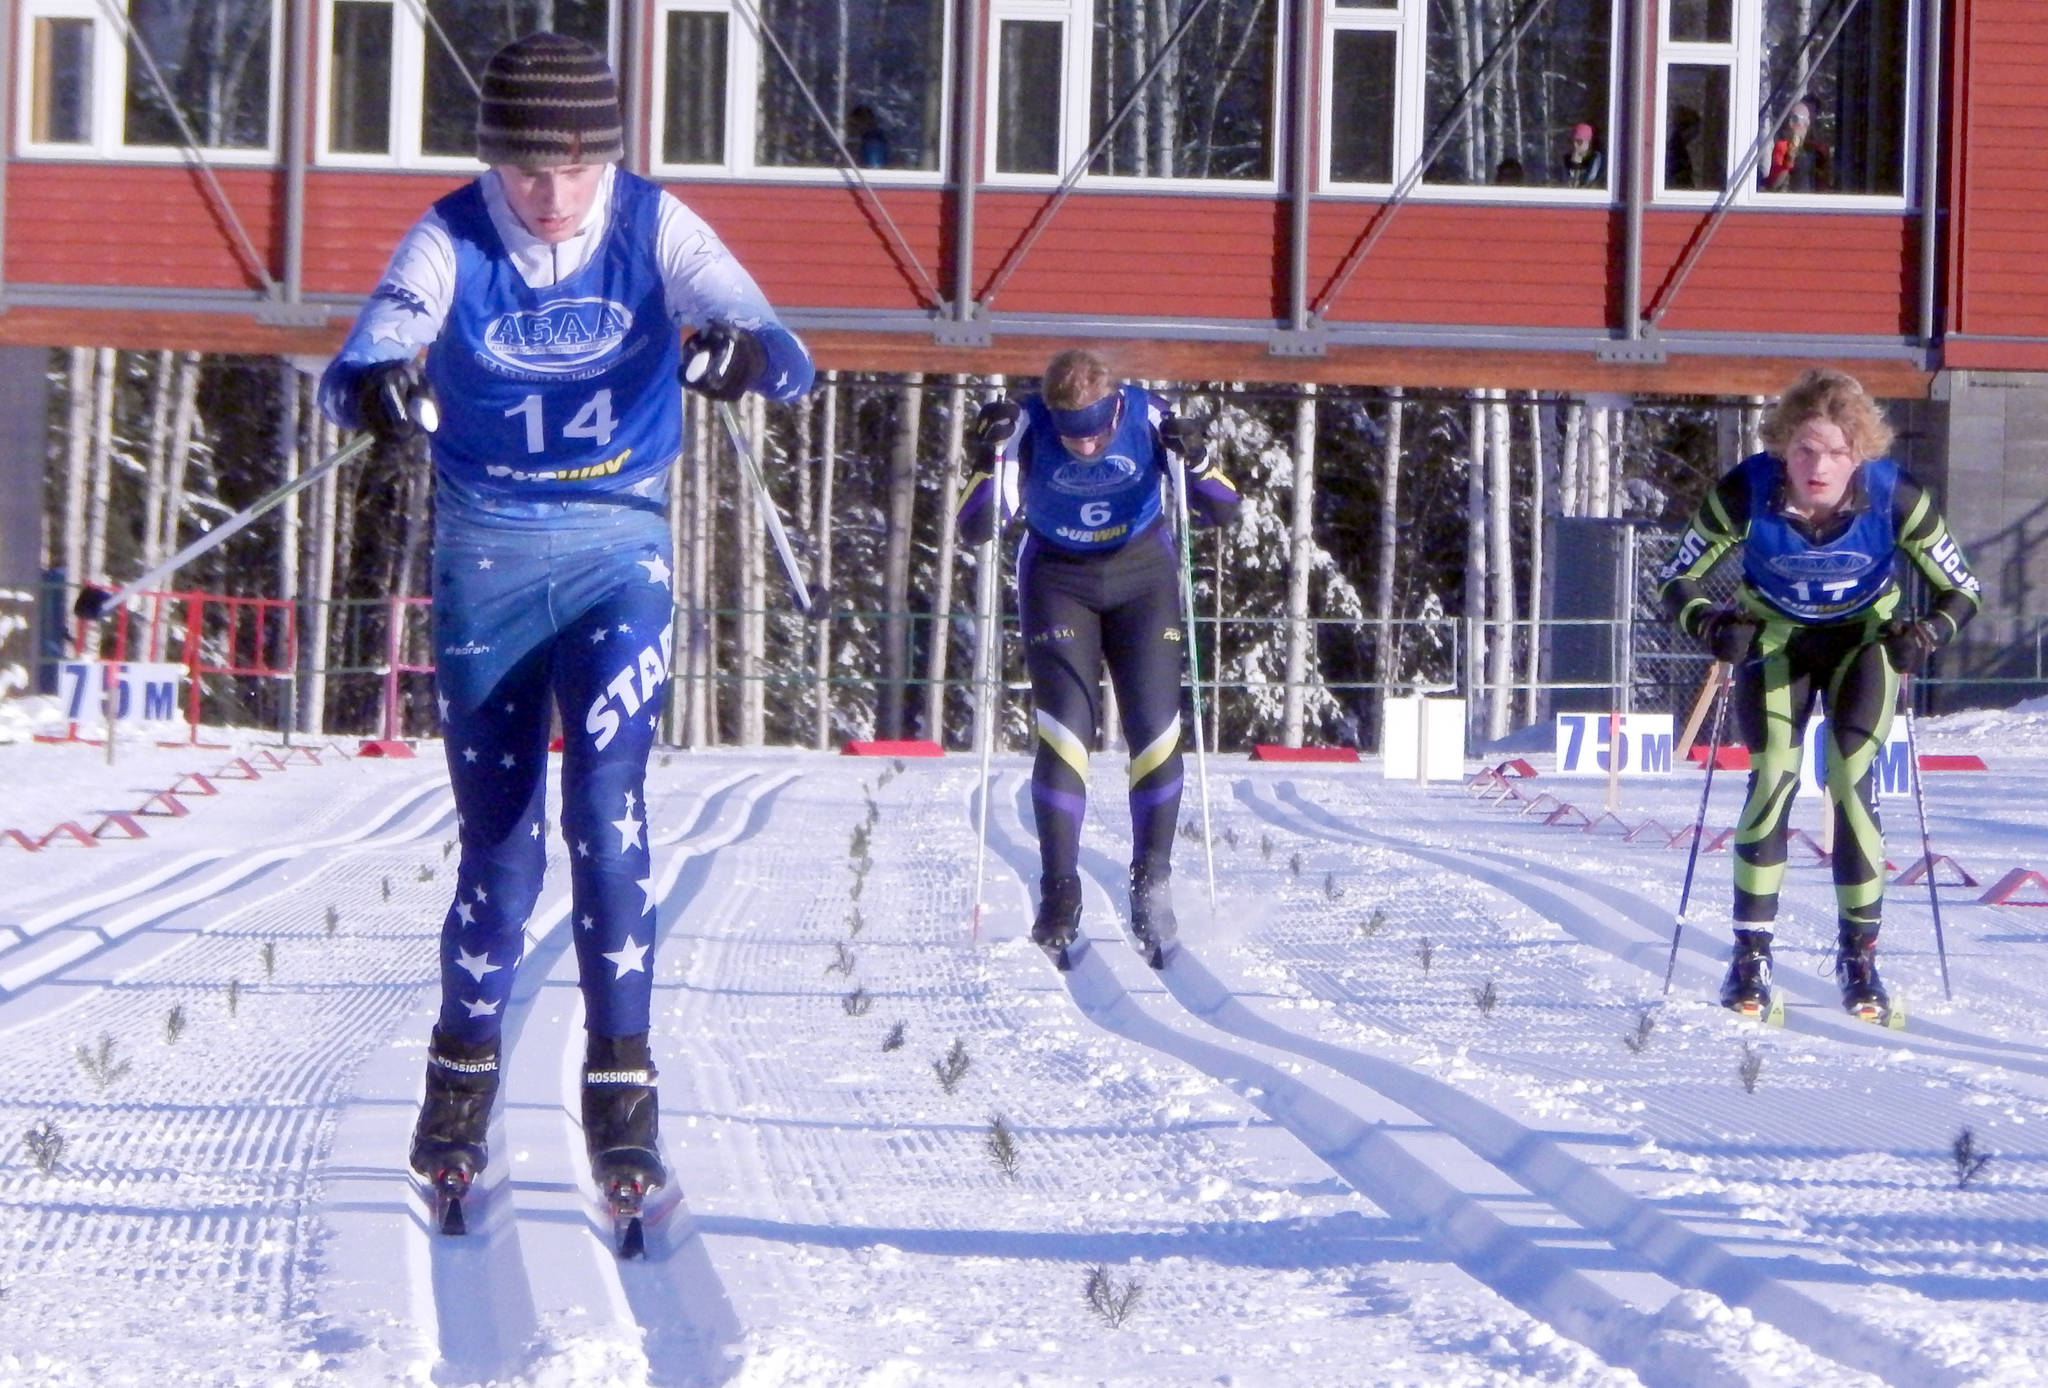 Soldotna’s Lance Chilton approaches the finish line while Lathrop’s Harrison Riggs, center, and Colony’s Norse Iverson, right, follow during the boys 7.5-kilometer classic technique race of the state ski meet Thursday at the Birch Hill Recreation Area in Fairbanks. (Photo by Danny Martin/Fairbanks Daily News-Miner)